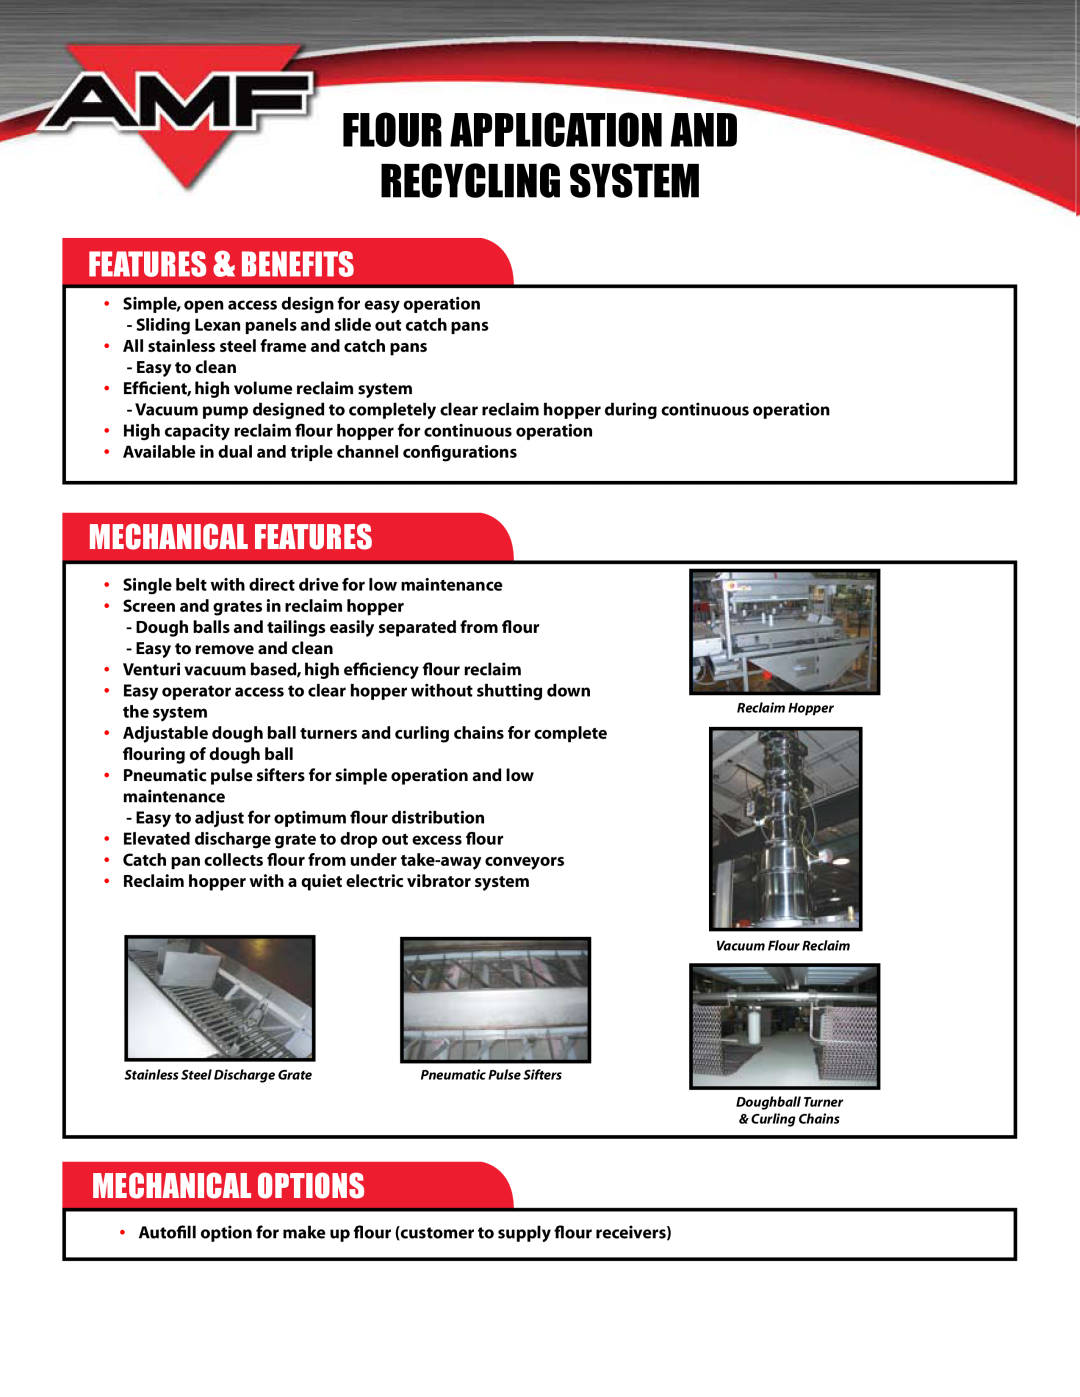 AMF Flour Application and Recycling System Flour Application And Recycling System, Features & Benefits, Mechanical Options 